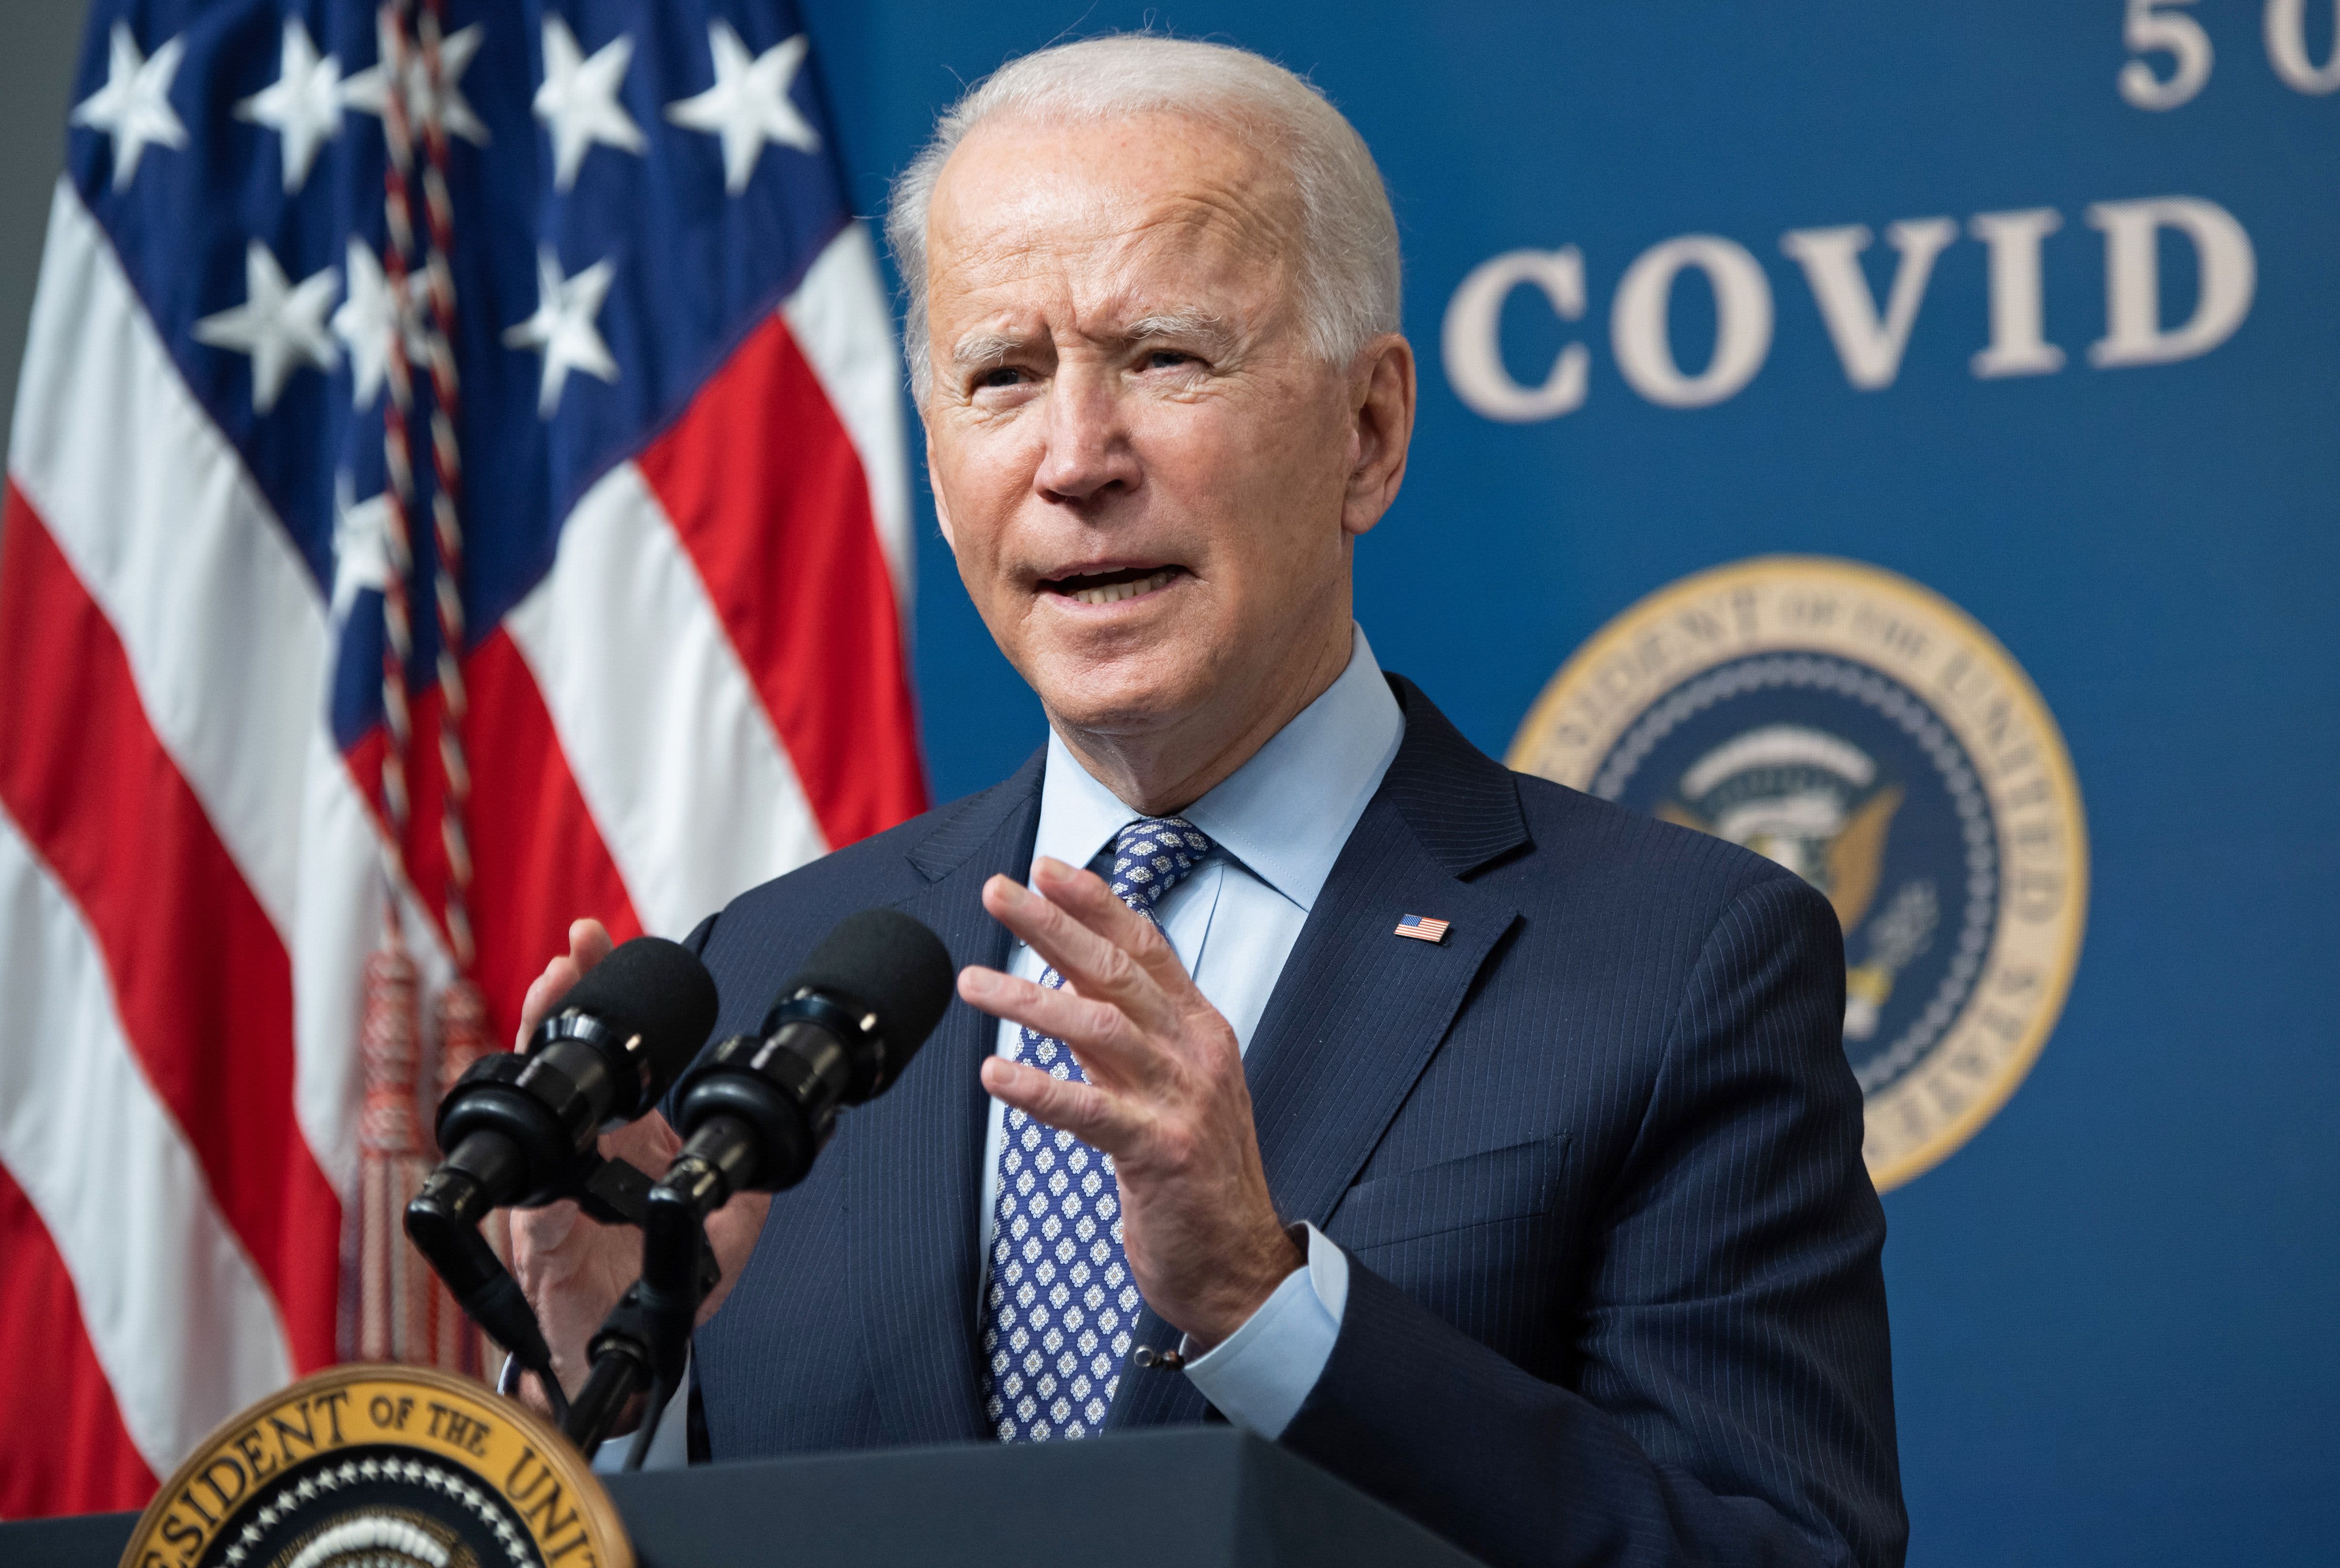 Biden administration to attract private companies, business groups to help in Covid’s struggle